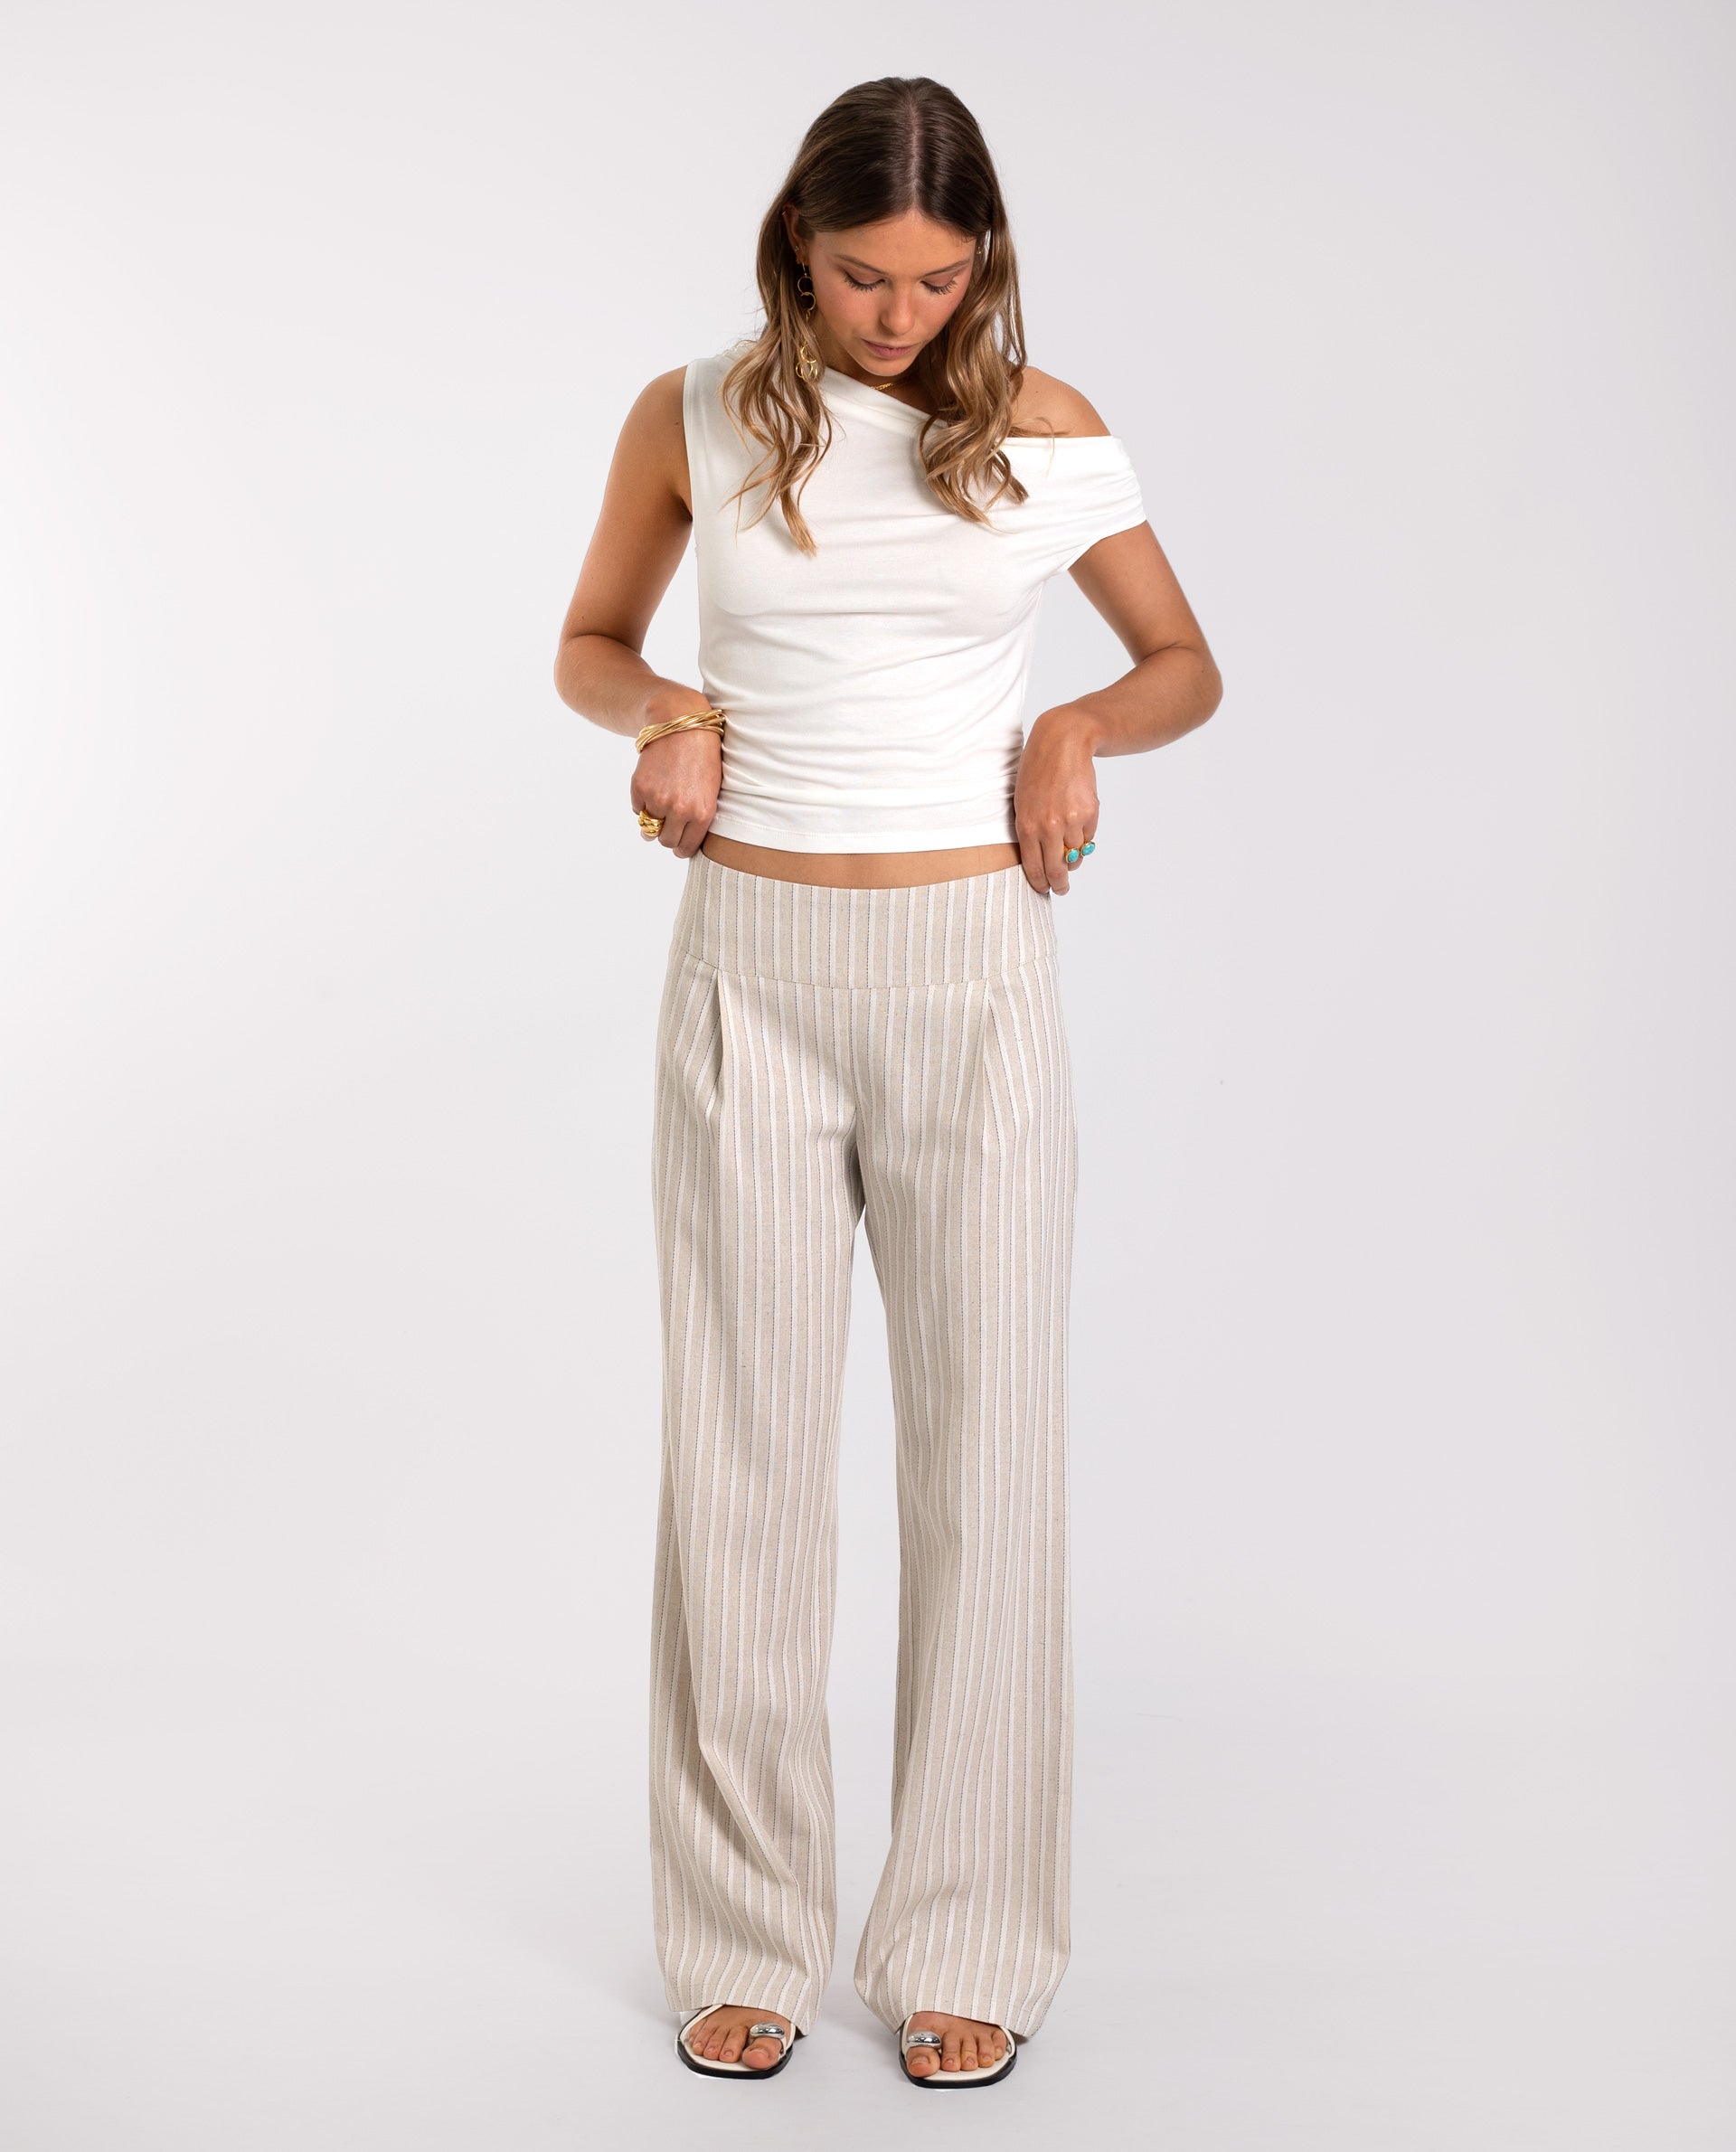 SINTRA PANTS - WHITE AND BEIGE